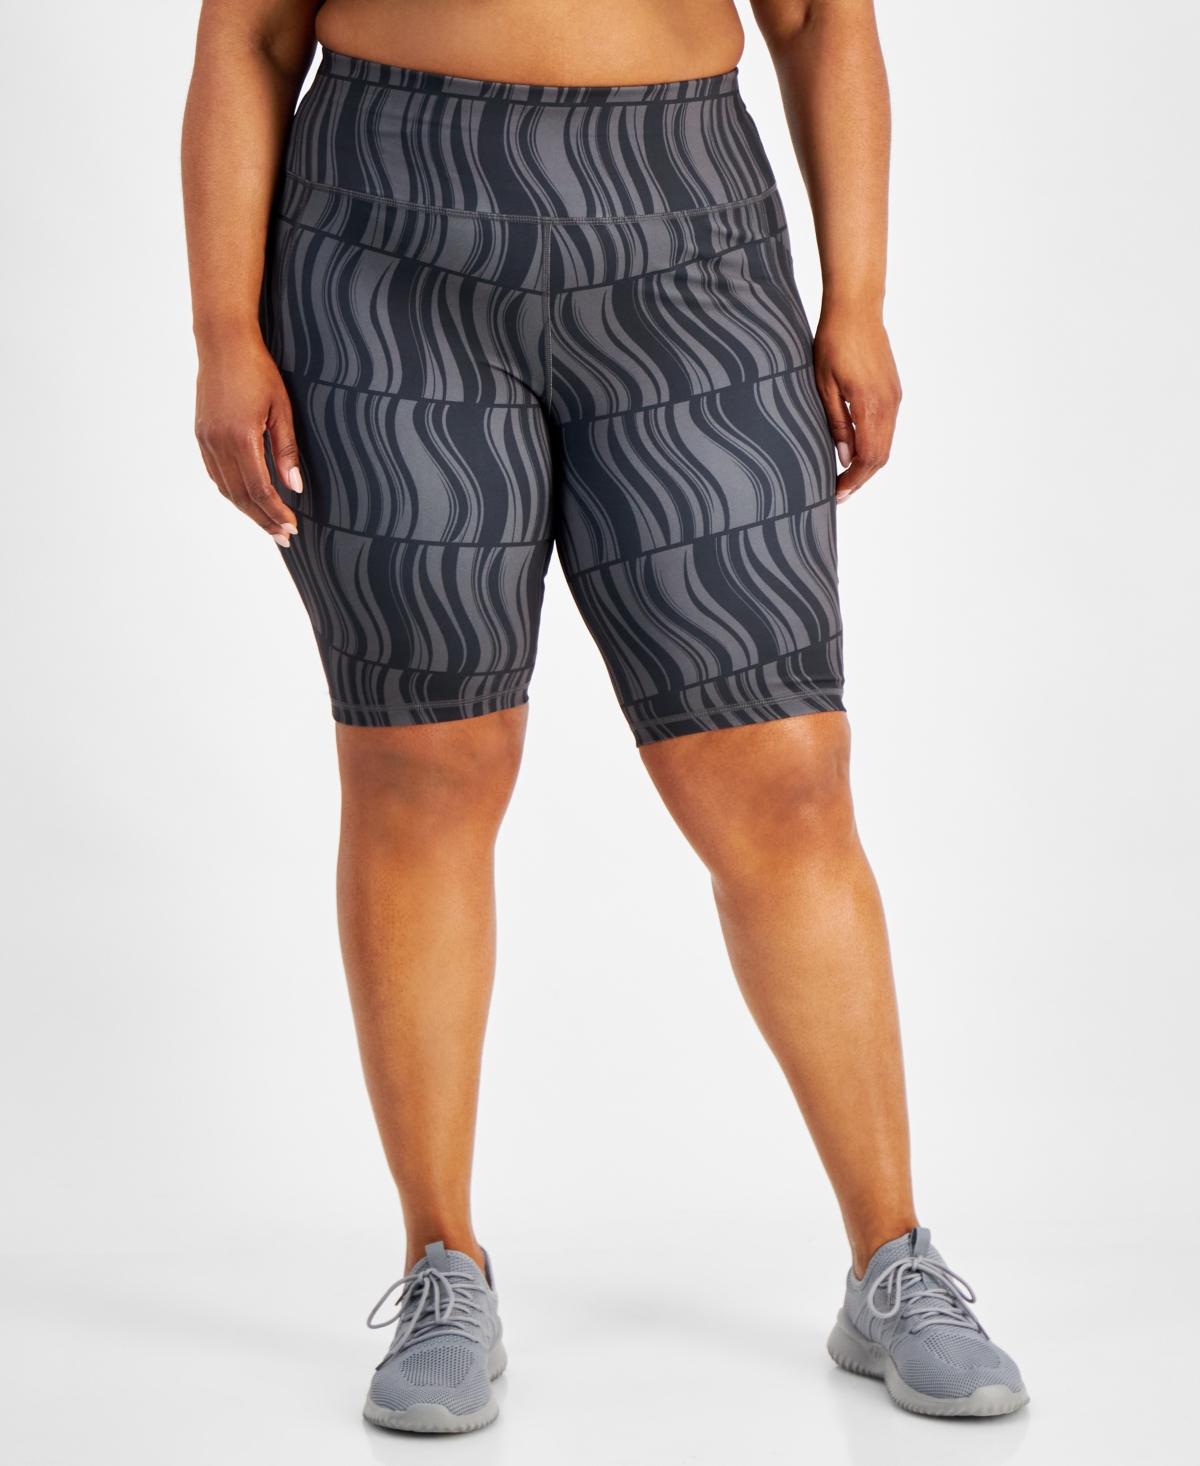 Plus Size Compression Geo-Print 10" Bike Shorts, Created for Macy's - Ocean Sigh